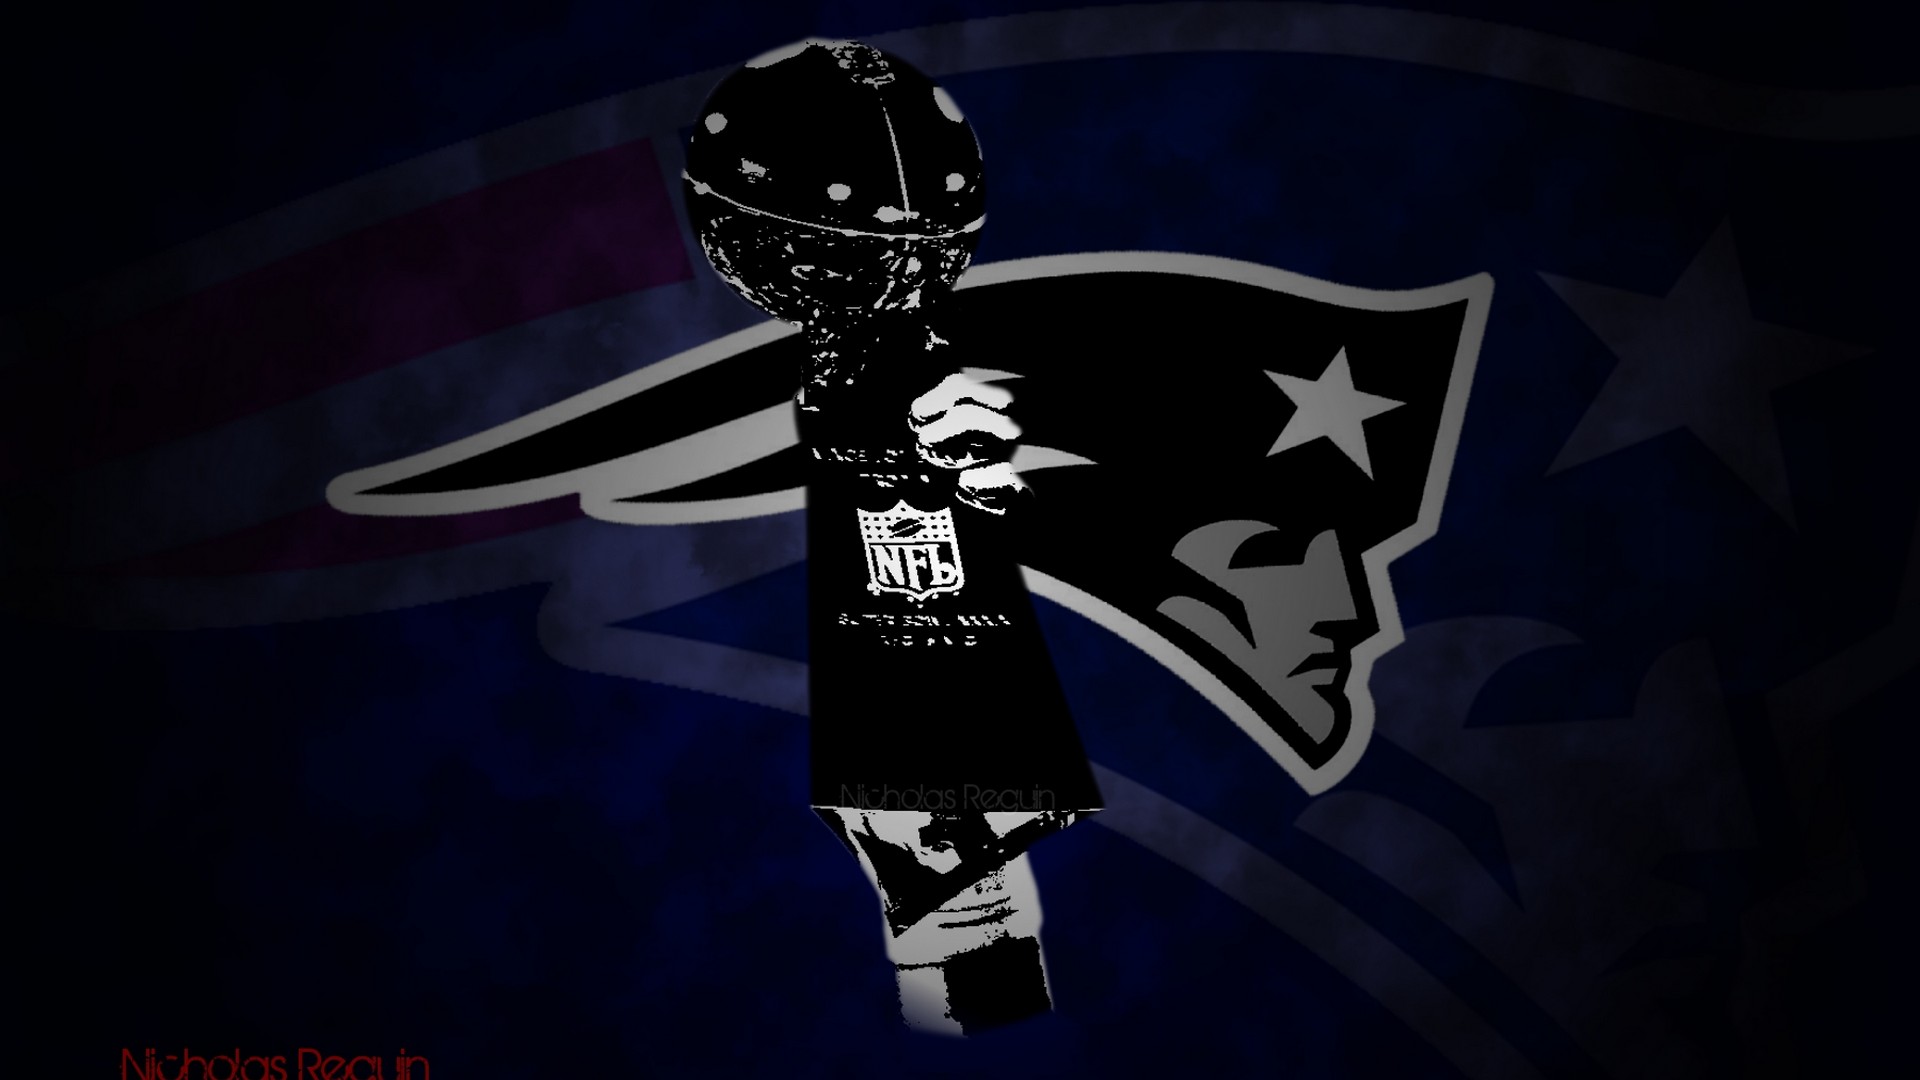 HD Desktop Wallpaper NE Patriots With Resolution 1920X1080 pixel. You can make this wallpaper for your Mac or Windows Desktop Background, iPhone, Android or Tablet and another Smartphone device for free